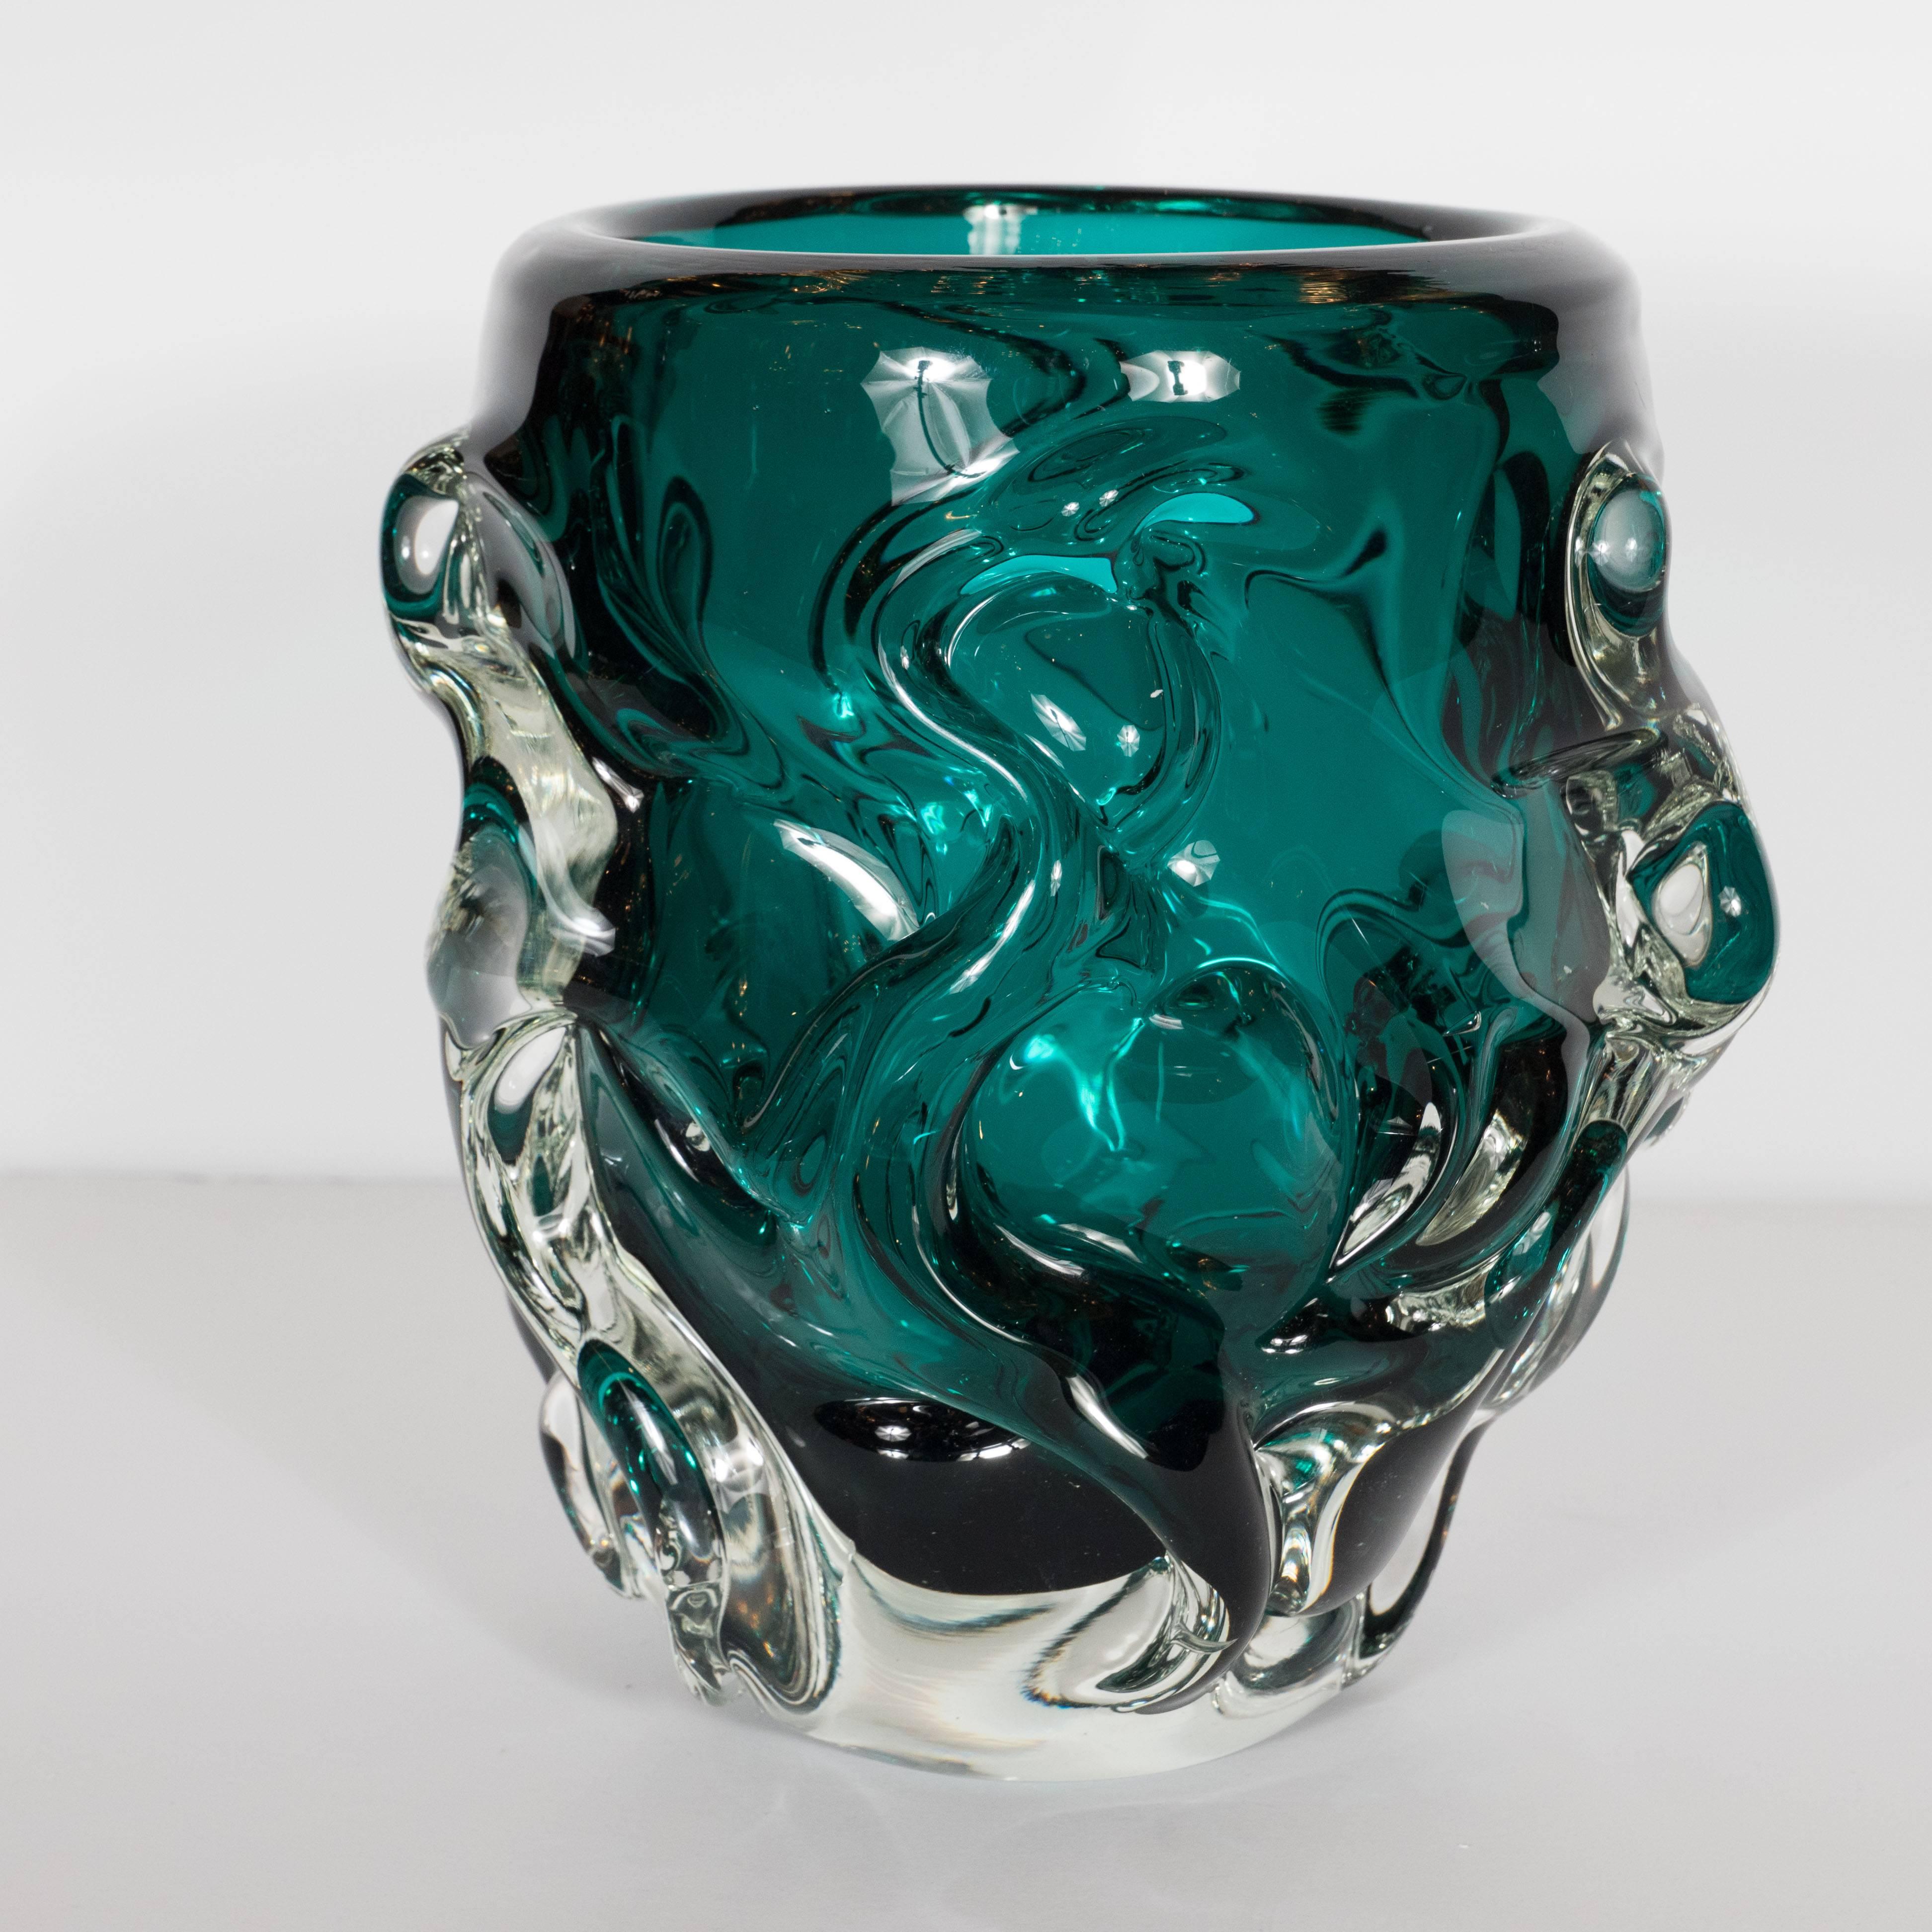 This gorgeous vase was realized in Murano, Italy- the islands off the coast of Venice that have been renowned for centuries for their superlative glass production, circa 1960. They feature highly textural exteriors composed of raised undulating